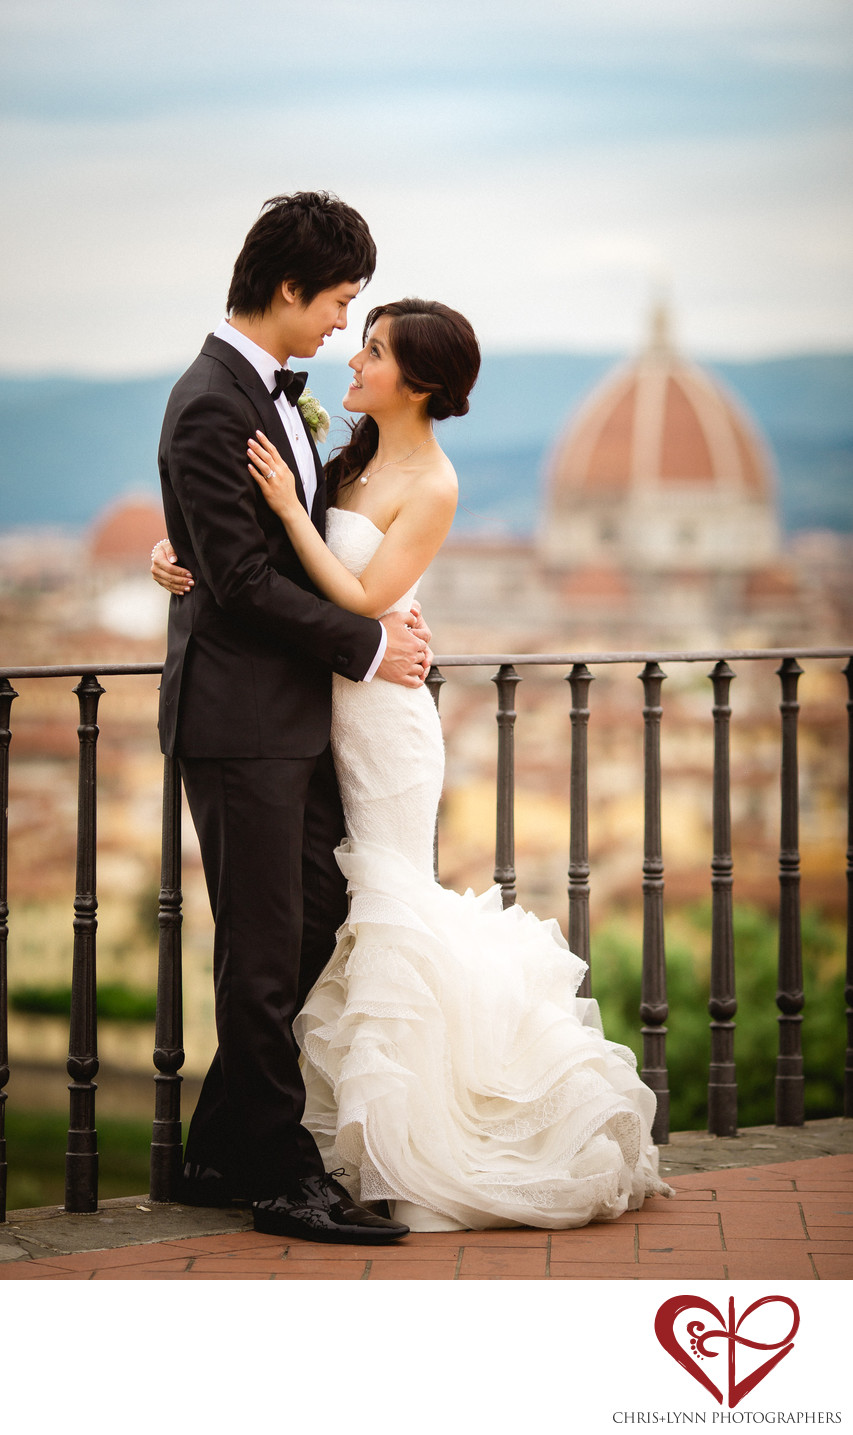 Wedding Photos in Florence, Italy